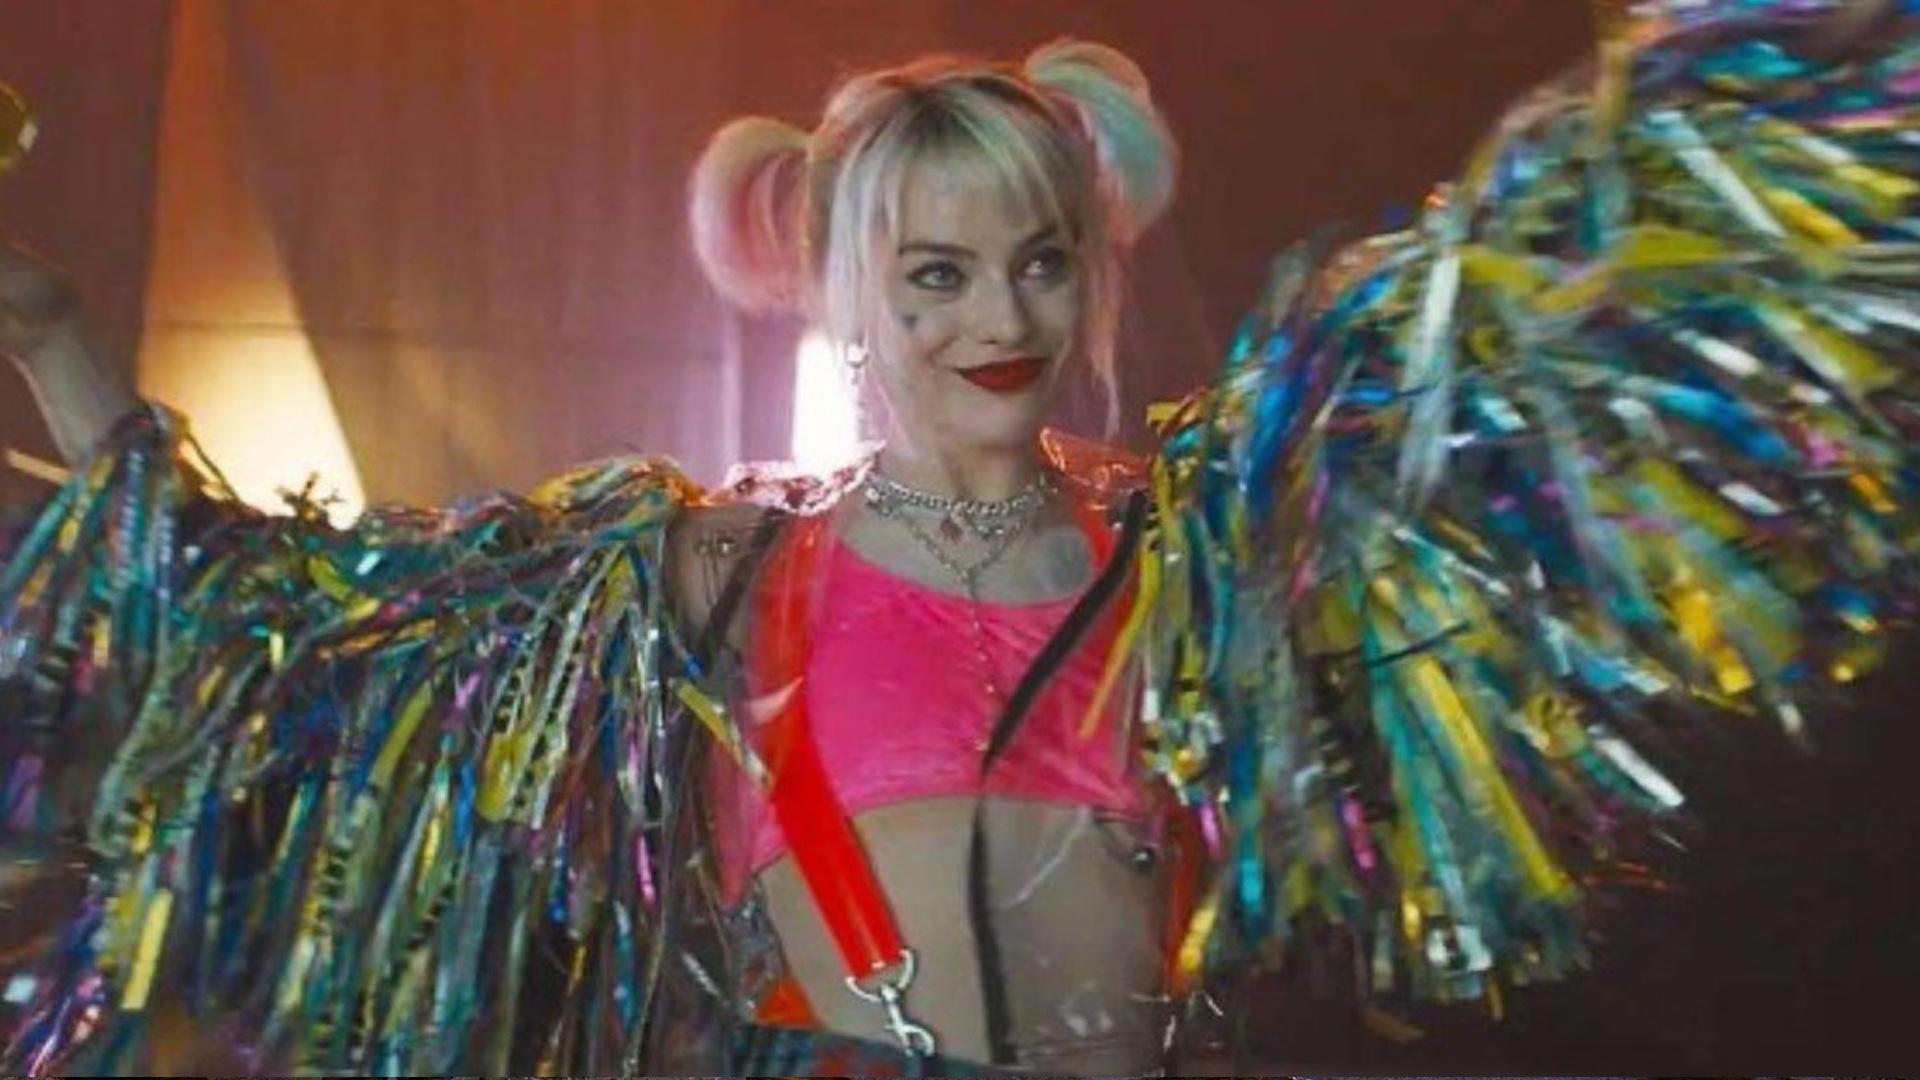 Concept Artist For BIRDS OF PREY Reveals First Full Look at